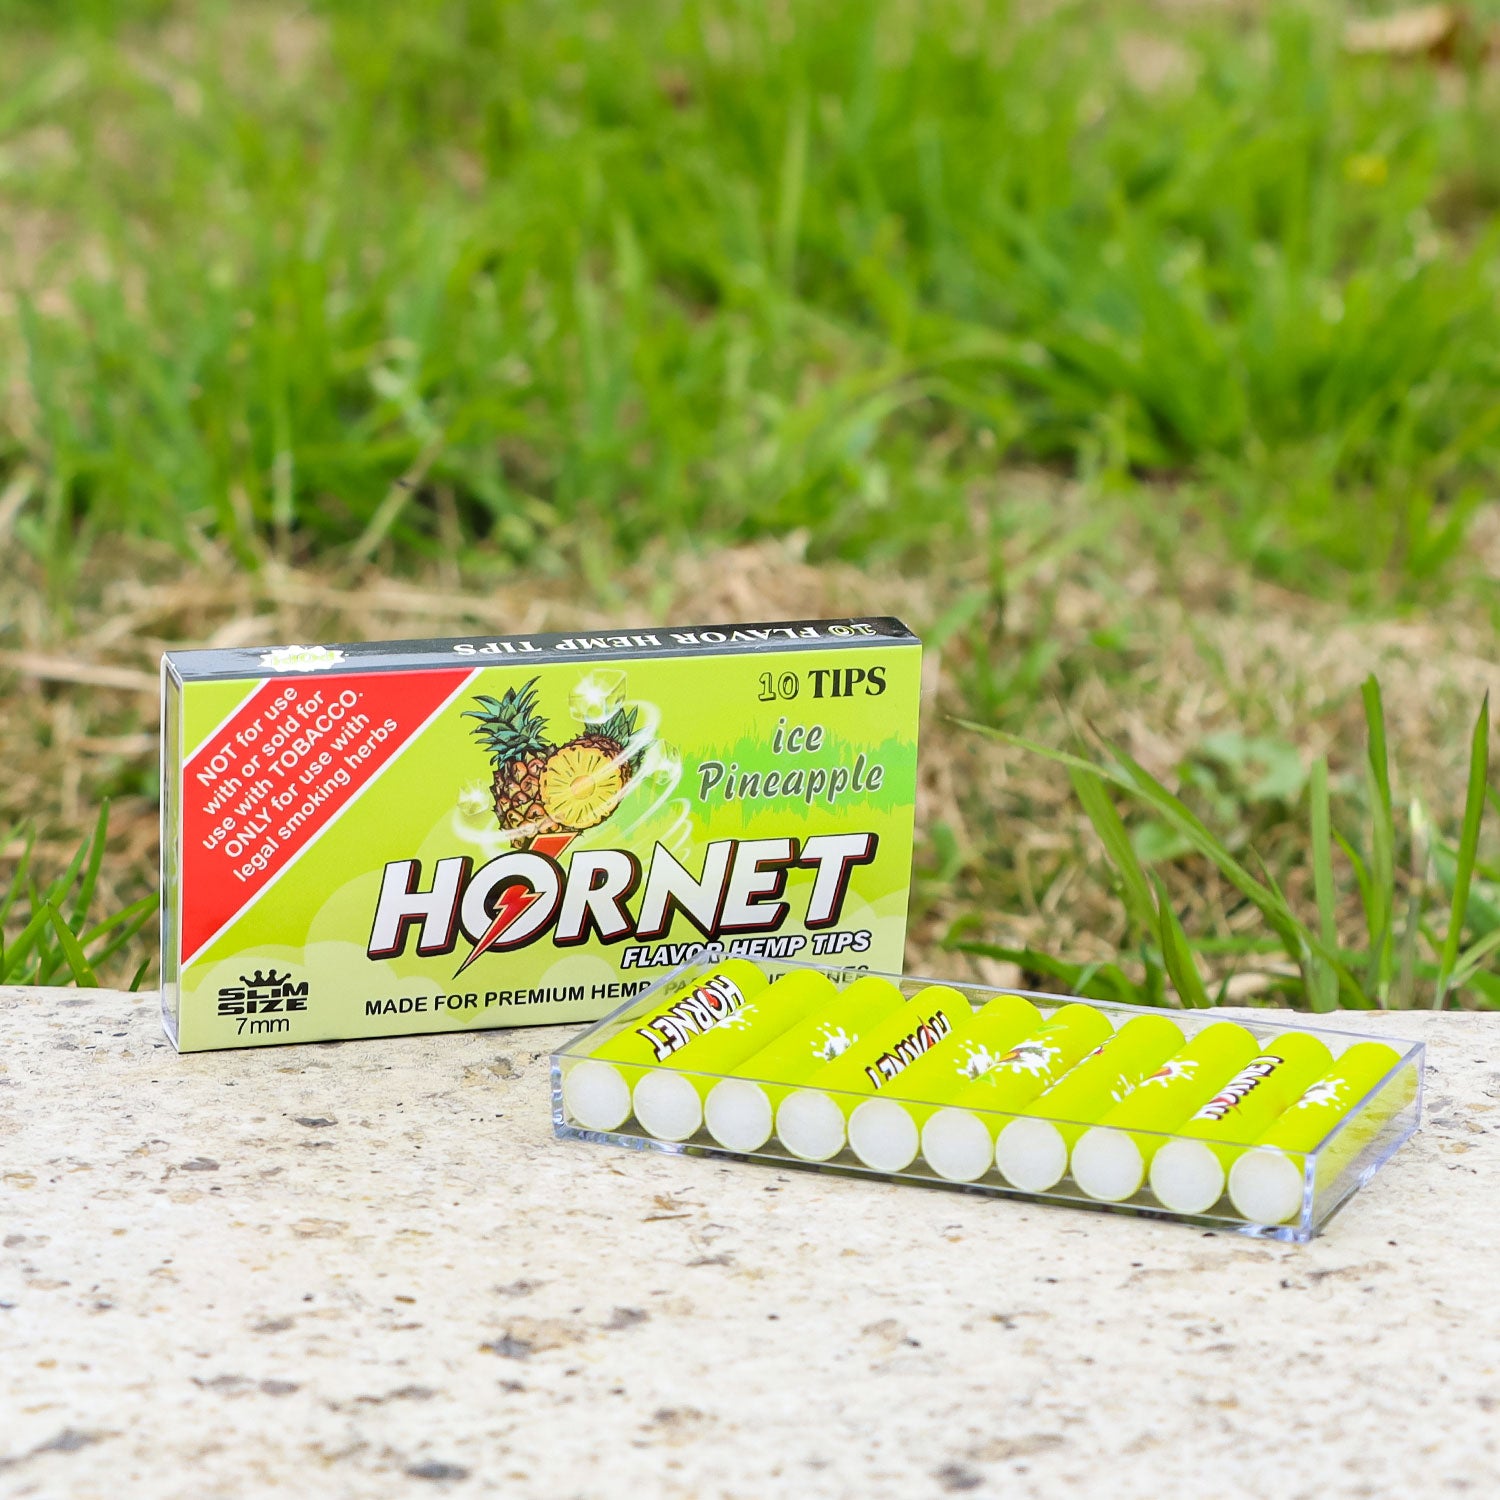 HORNET Pineapple Flavors Filter Tips with Flavored Pop, 7 mm Filter Tips, 10 Tips / Pack 24 Packs / Box